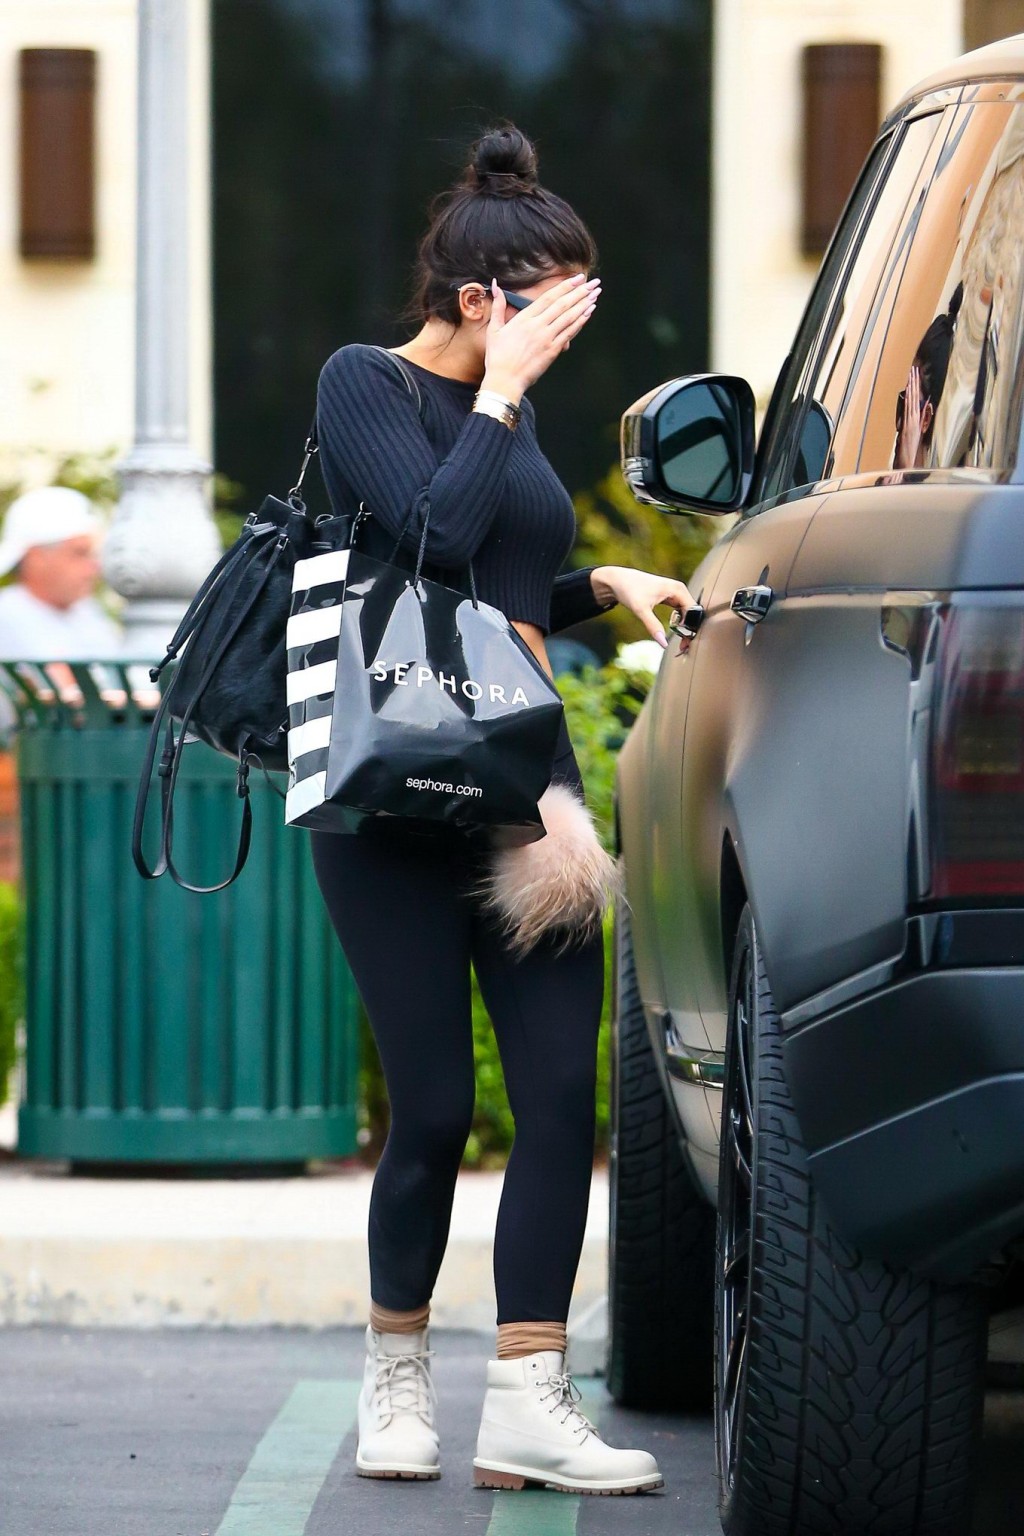 Kylie Jenner mostra il suo culo in collant mentre lo shopping a Sephora in Calabasas
 #75169724